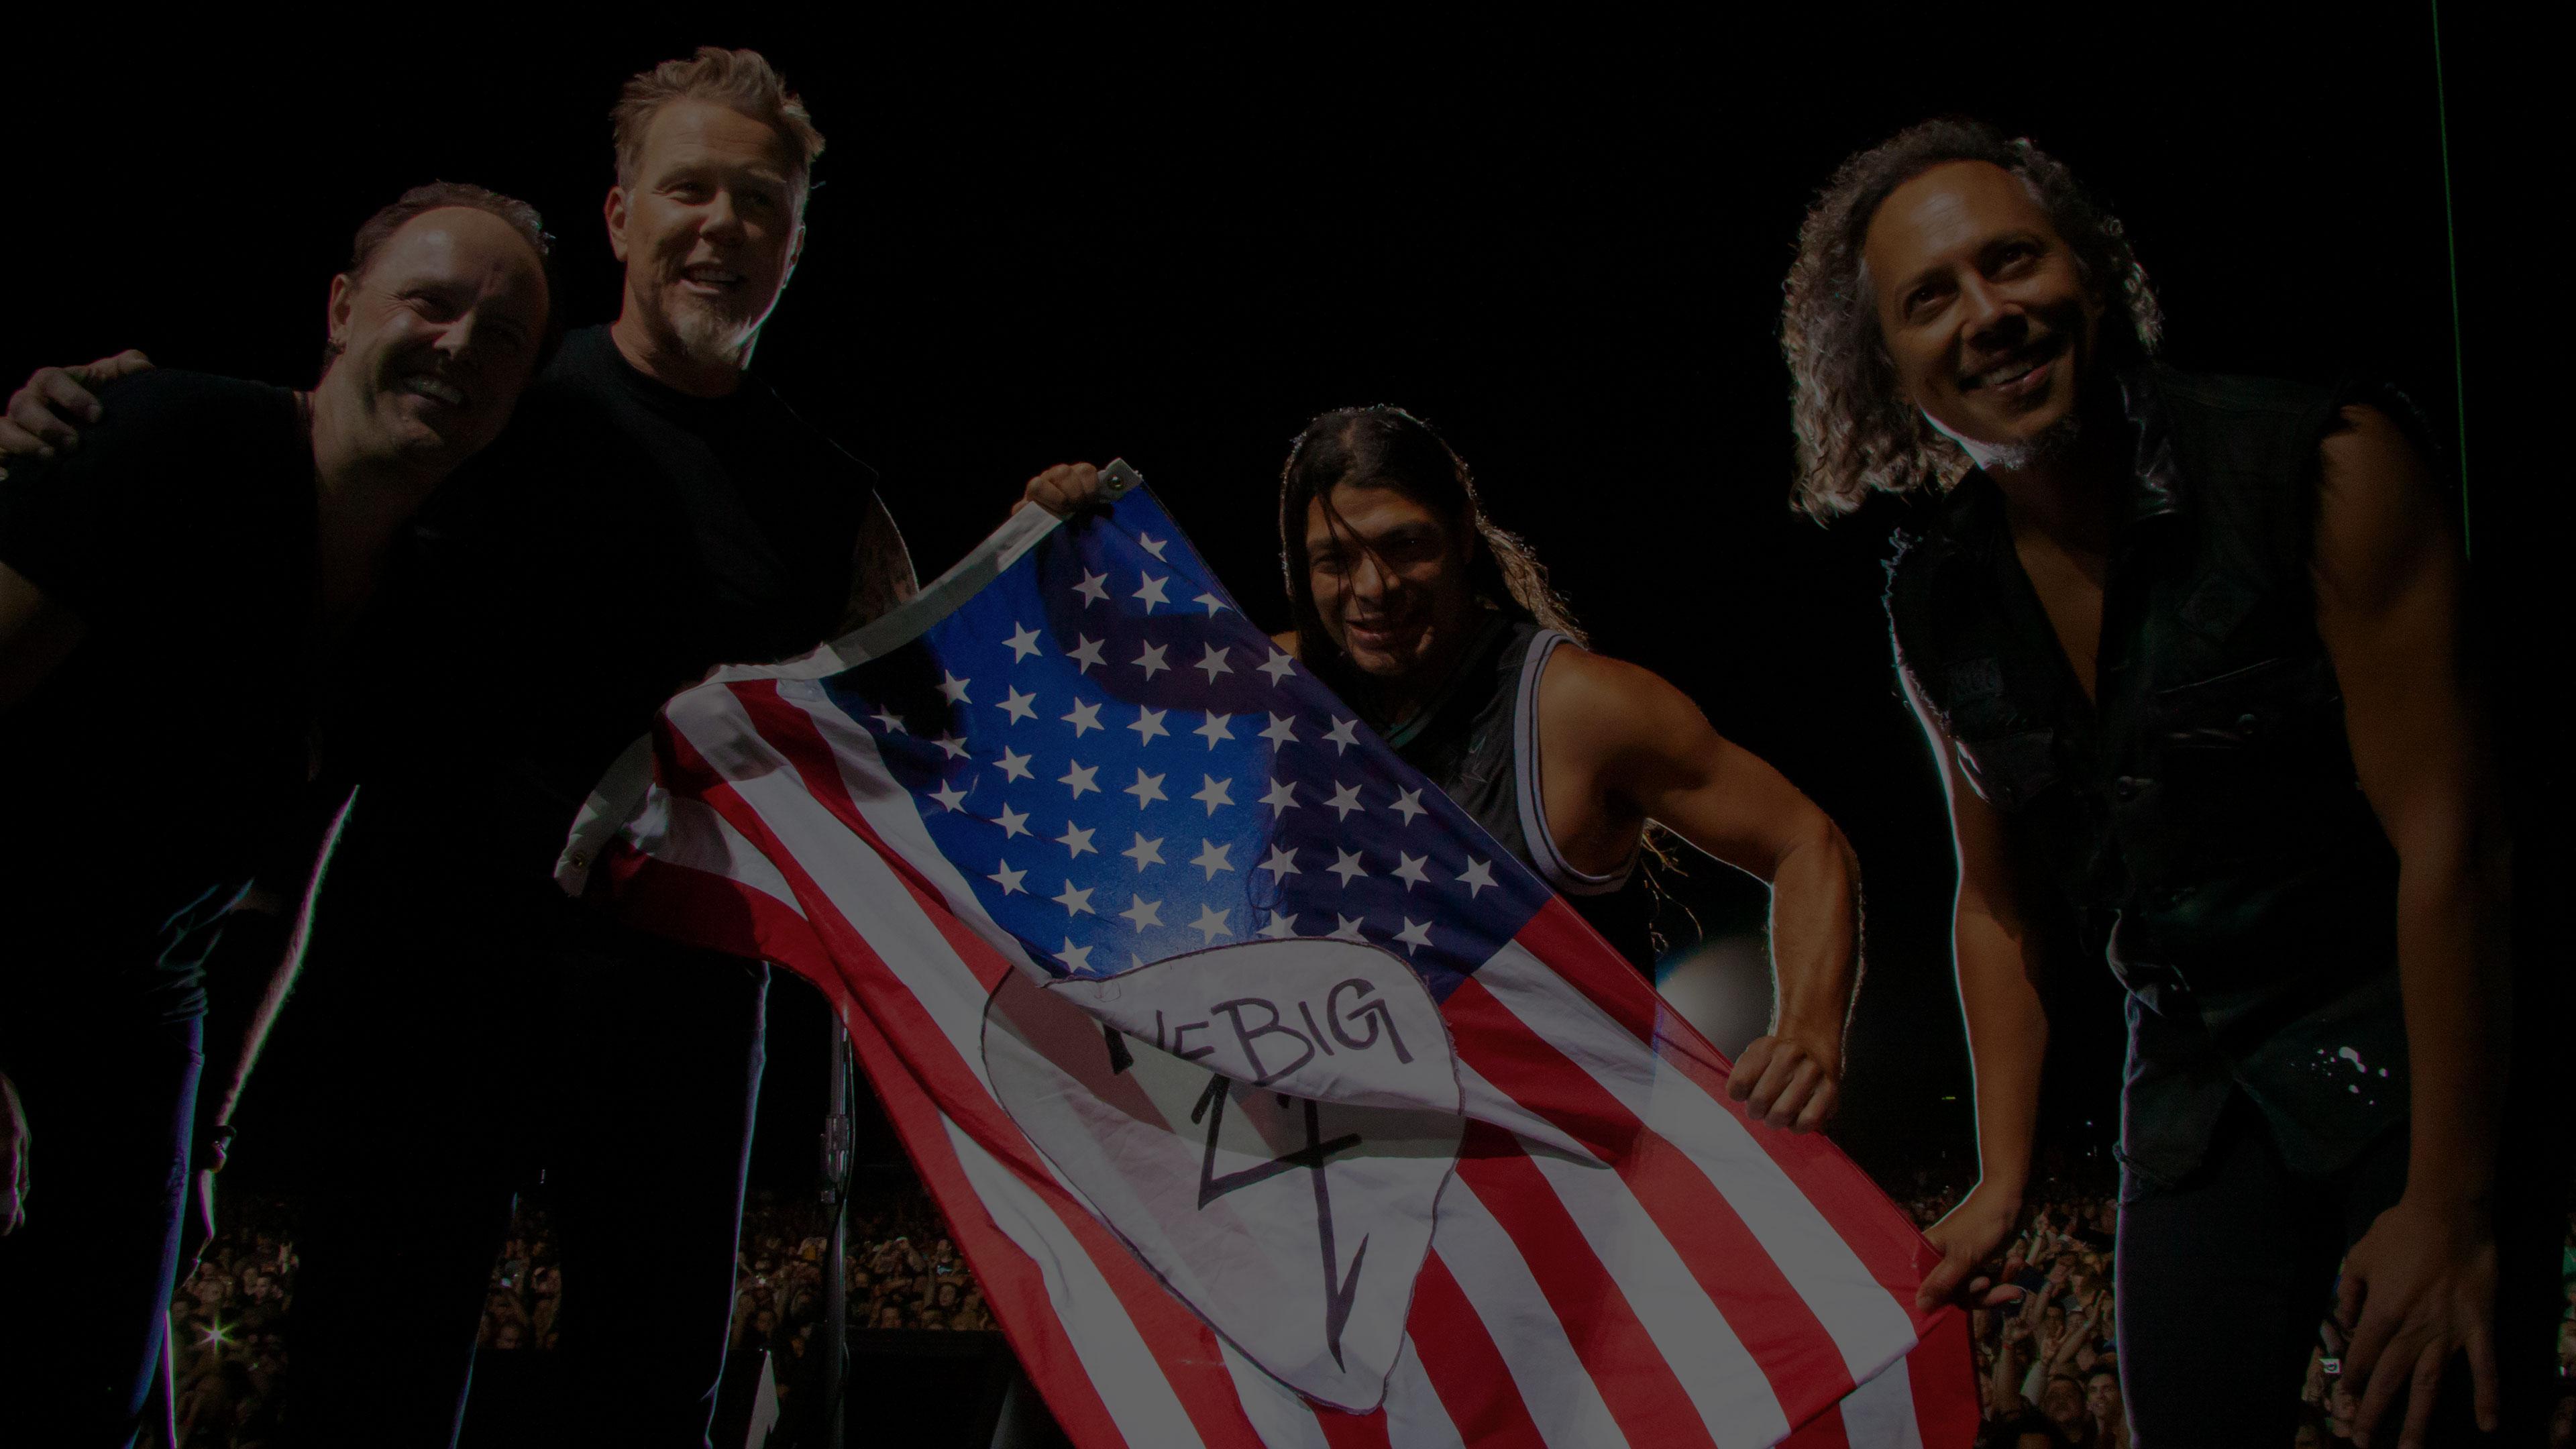 Metallica at The Big 4 at Empire Polo Club in Indio, CA on April 23, 2011